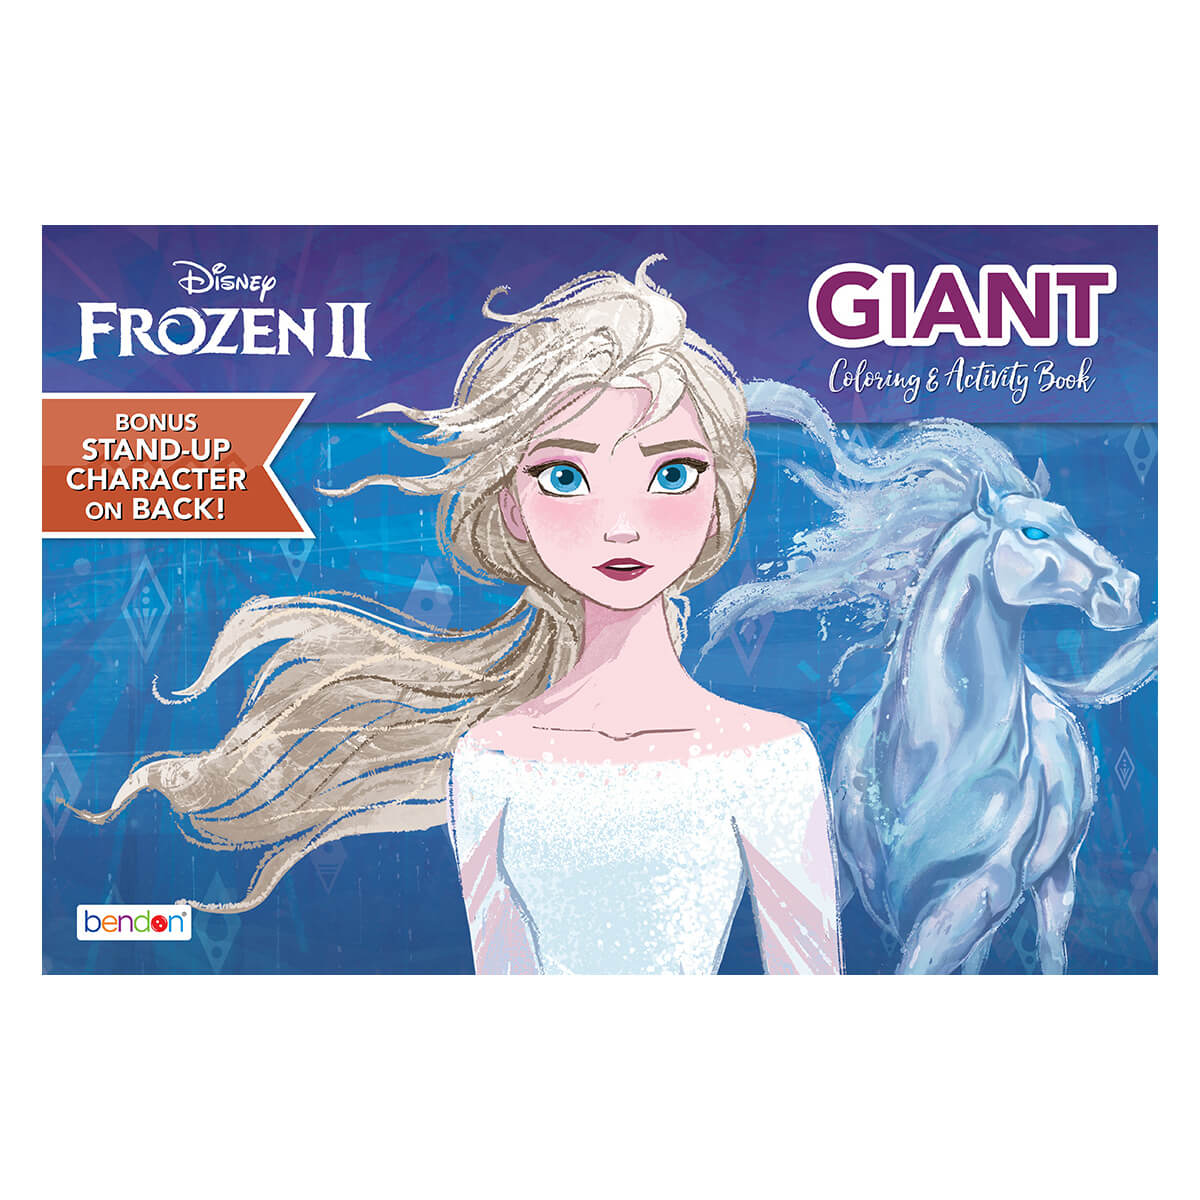 Bendon Frozen 2 Giant 11" x 16" Coloring and Activity Book